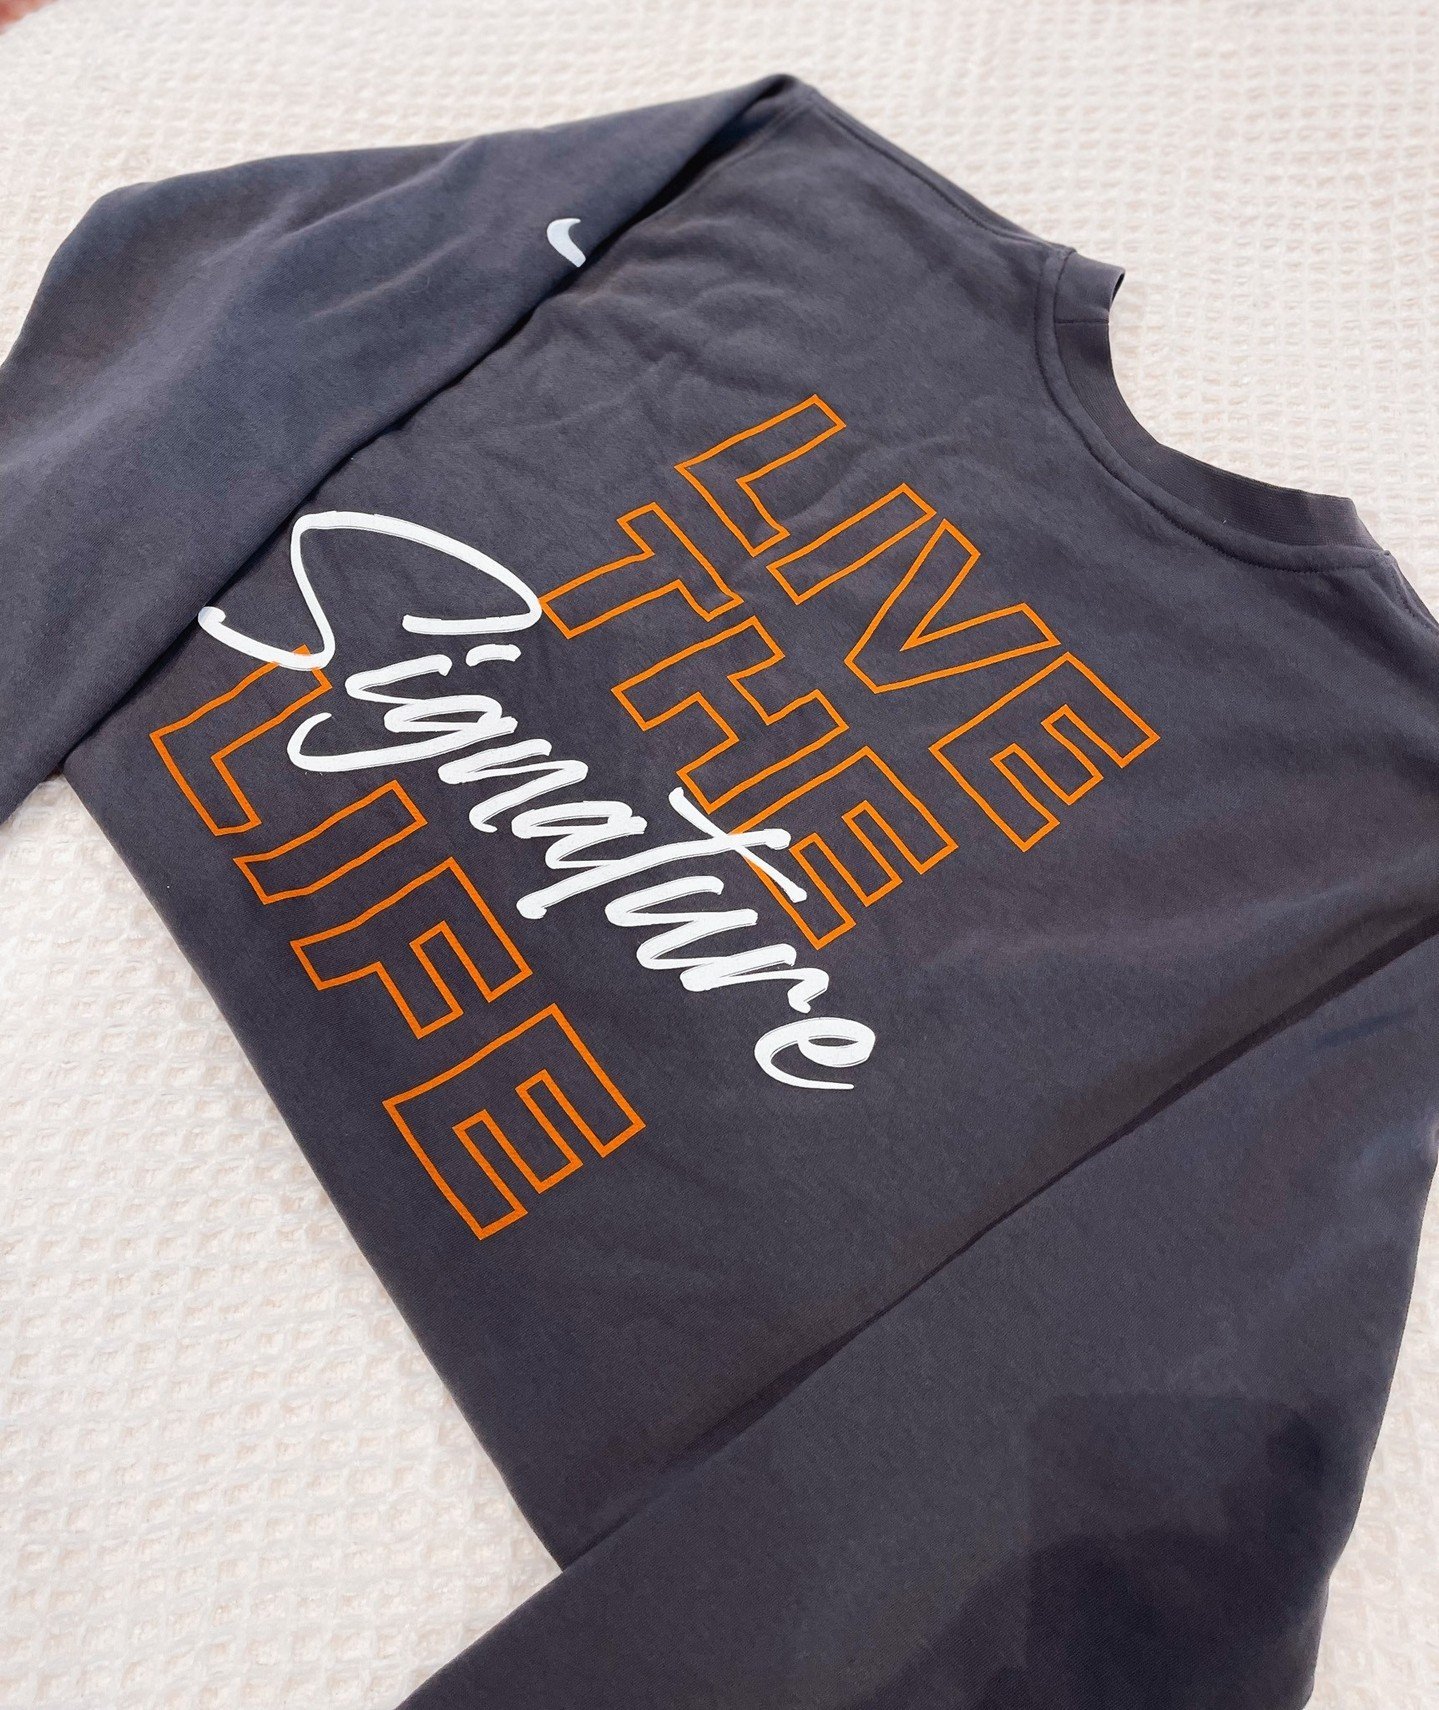 ✨️GIVEAWAY✨️⁠

1, 2, 3.... Just 3 steps to win our Signature Nike Crewneck and a custom mug!⁠
⁠
1. Follow our page-Like the post⁠
2. Comment⁠
3. Tag your future roommate or a friend!⁠
⁠
Giveaway deadline ends EOD 4/26!